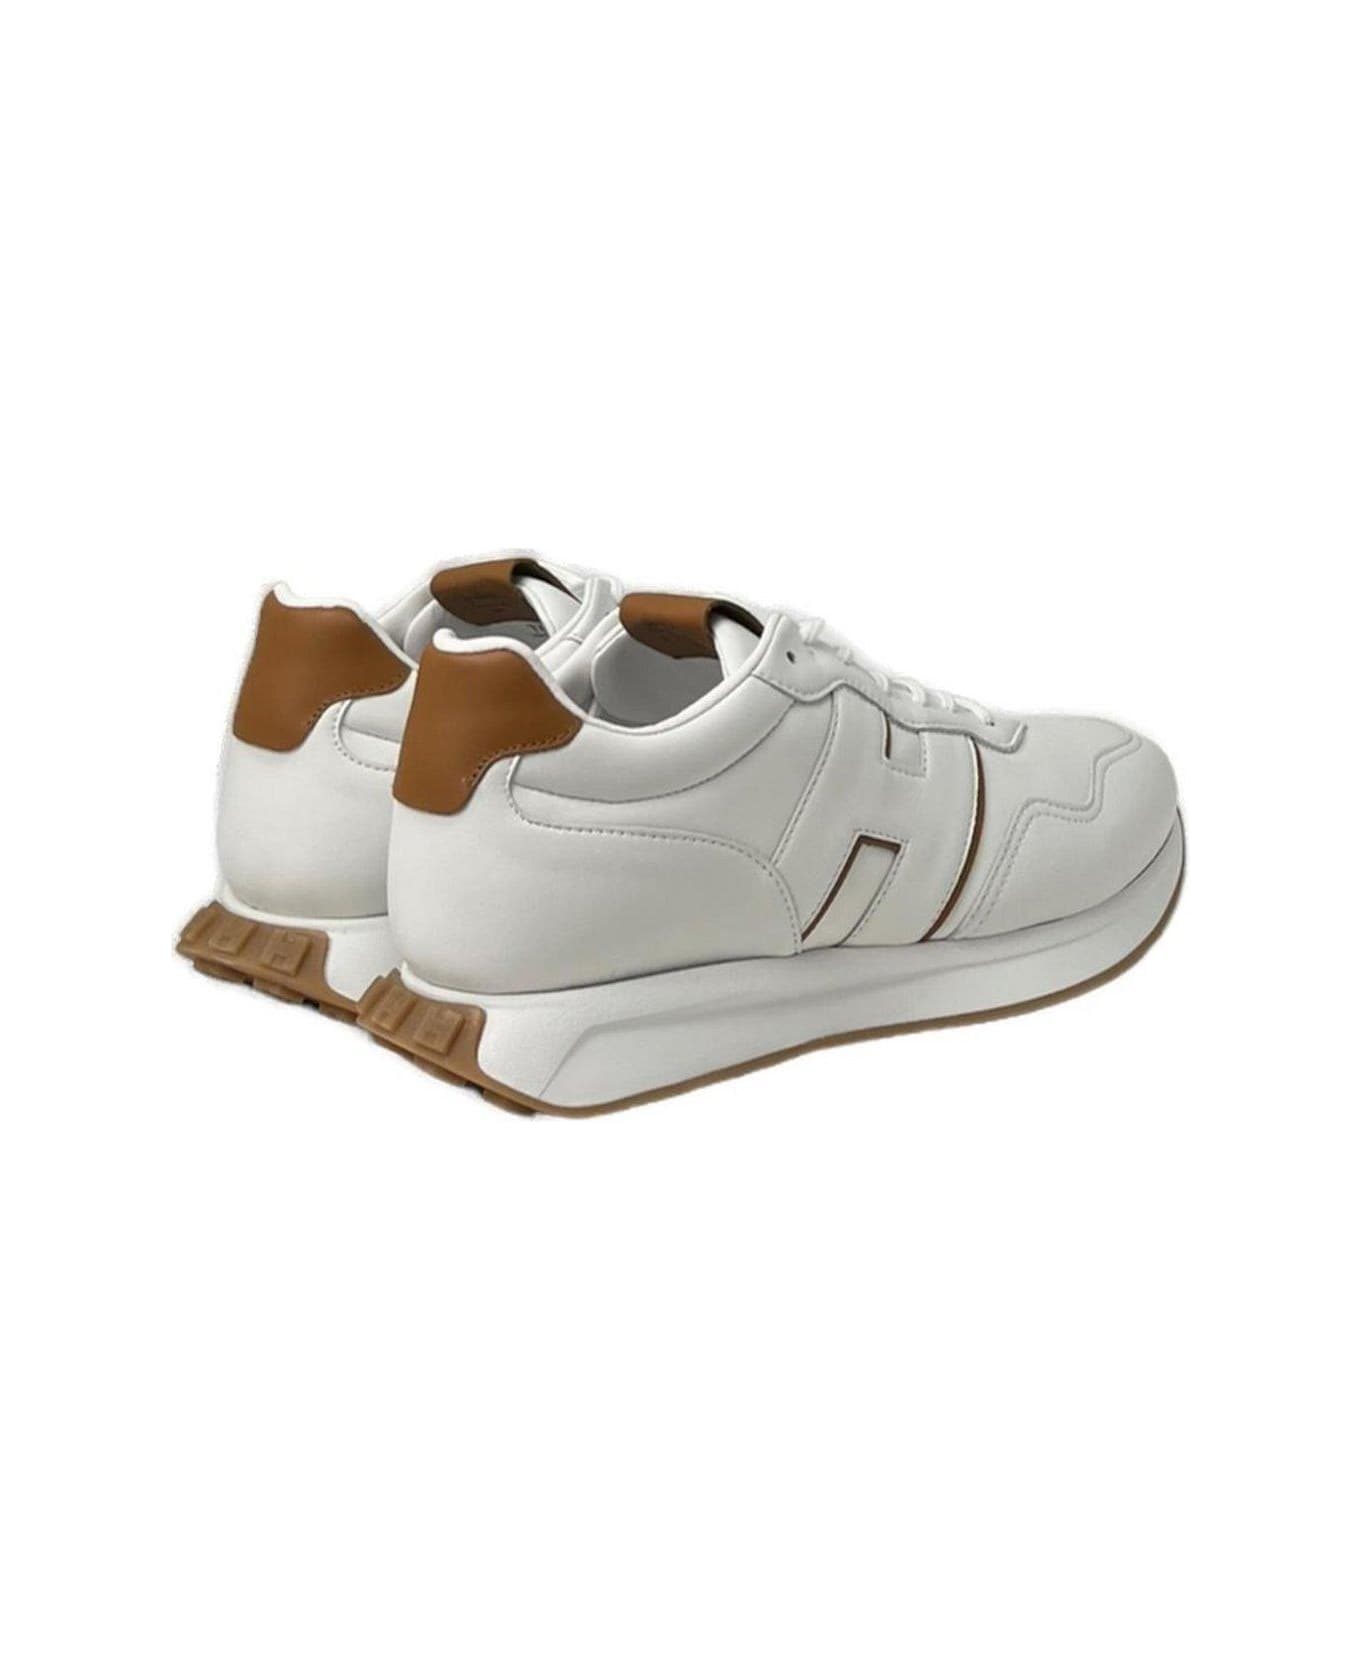 Hogan H601 Leather Sneakers - White